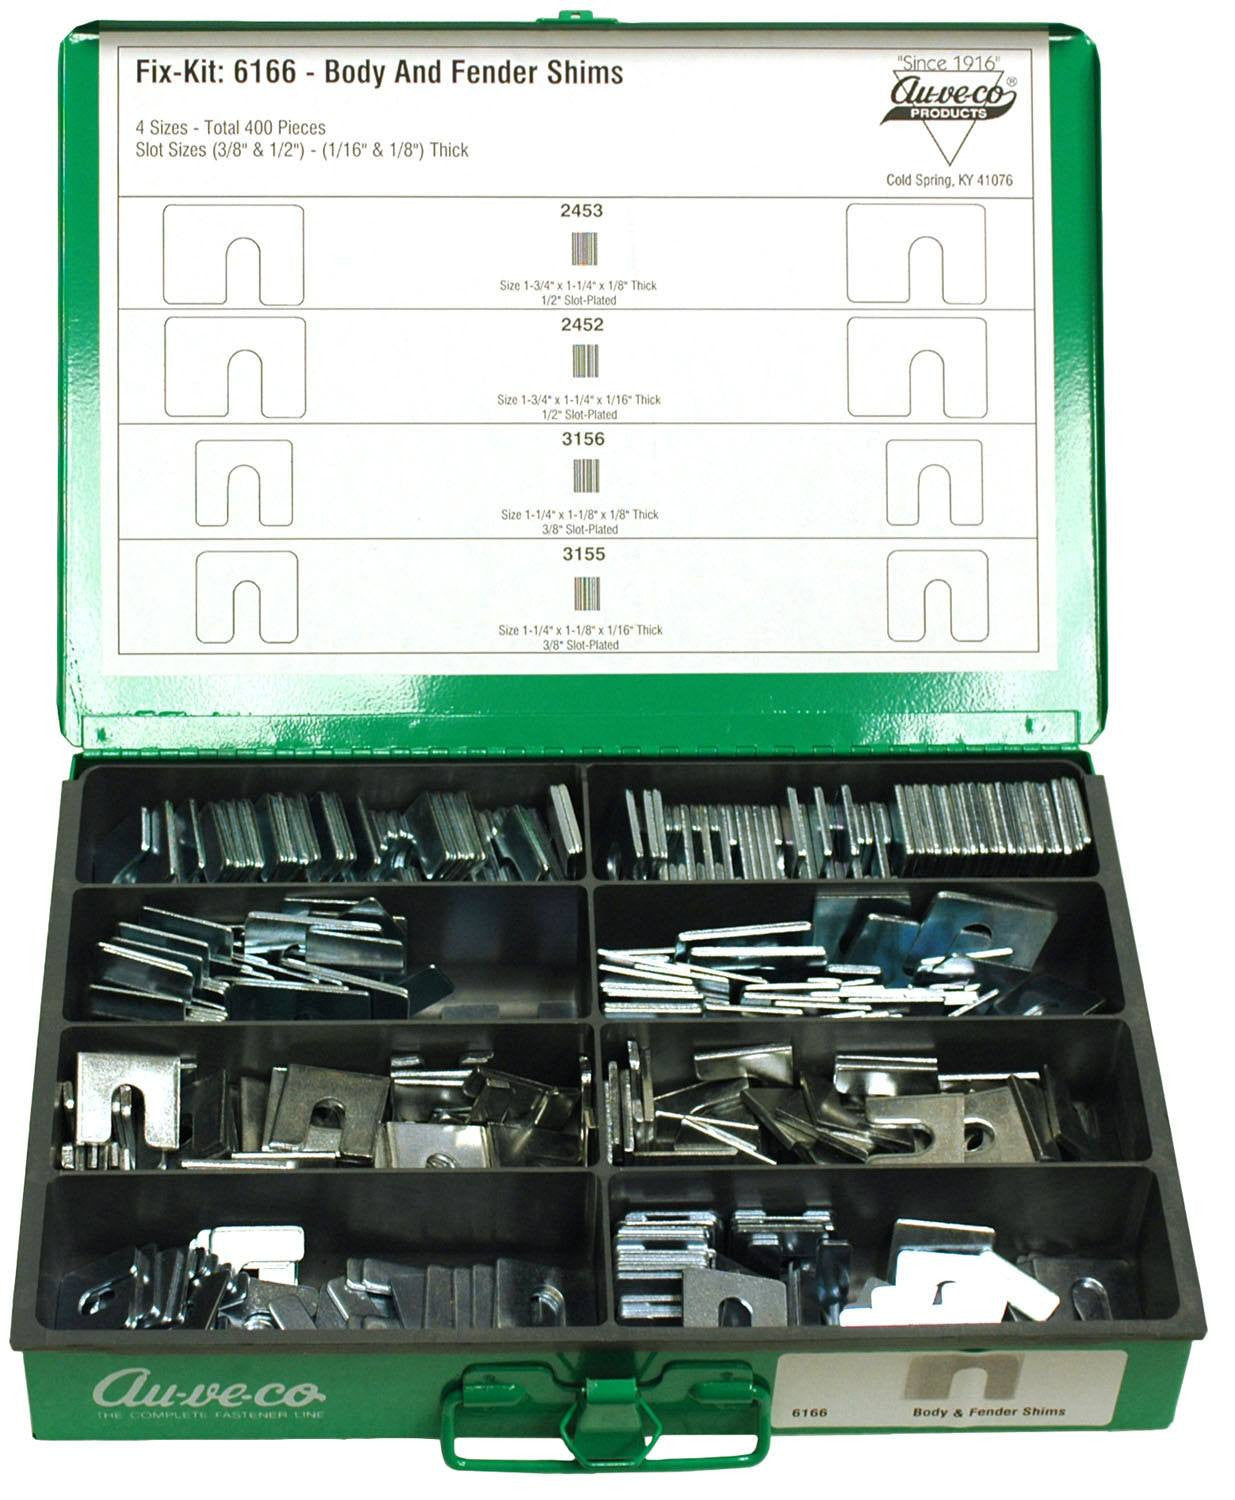 Grade A Tools Self Piercing Rivets 1500 Piece with Storage Case